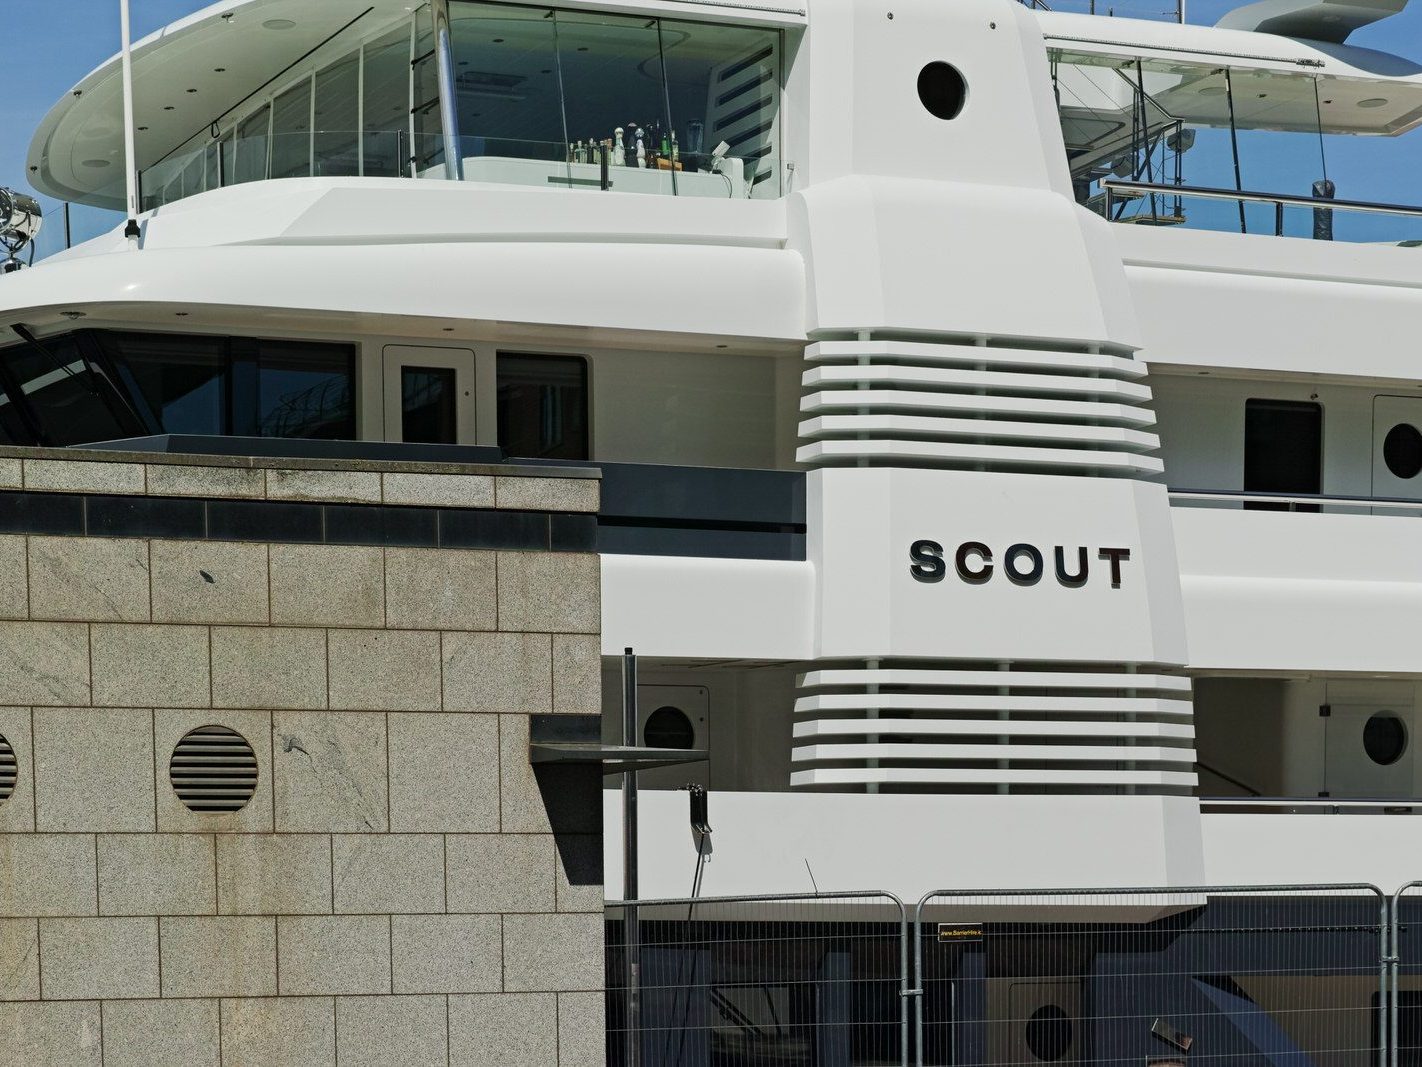 SCOUT IS A SUPERYACHT NAMED AFTER THE OWNER'S DOG [MOORED AT SIR JOHN ROGERSON'S QUAY IN DUBLIN] 003